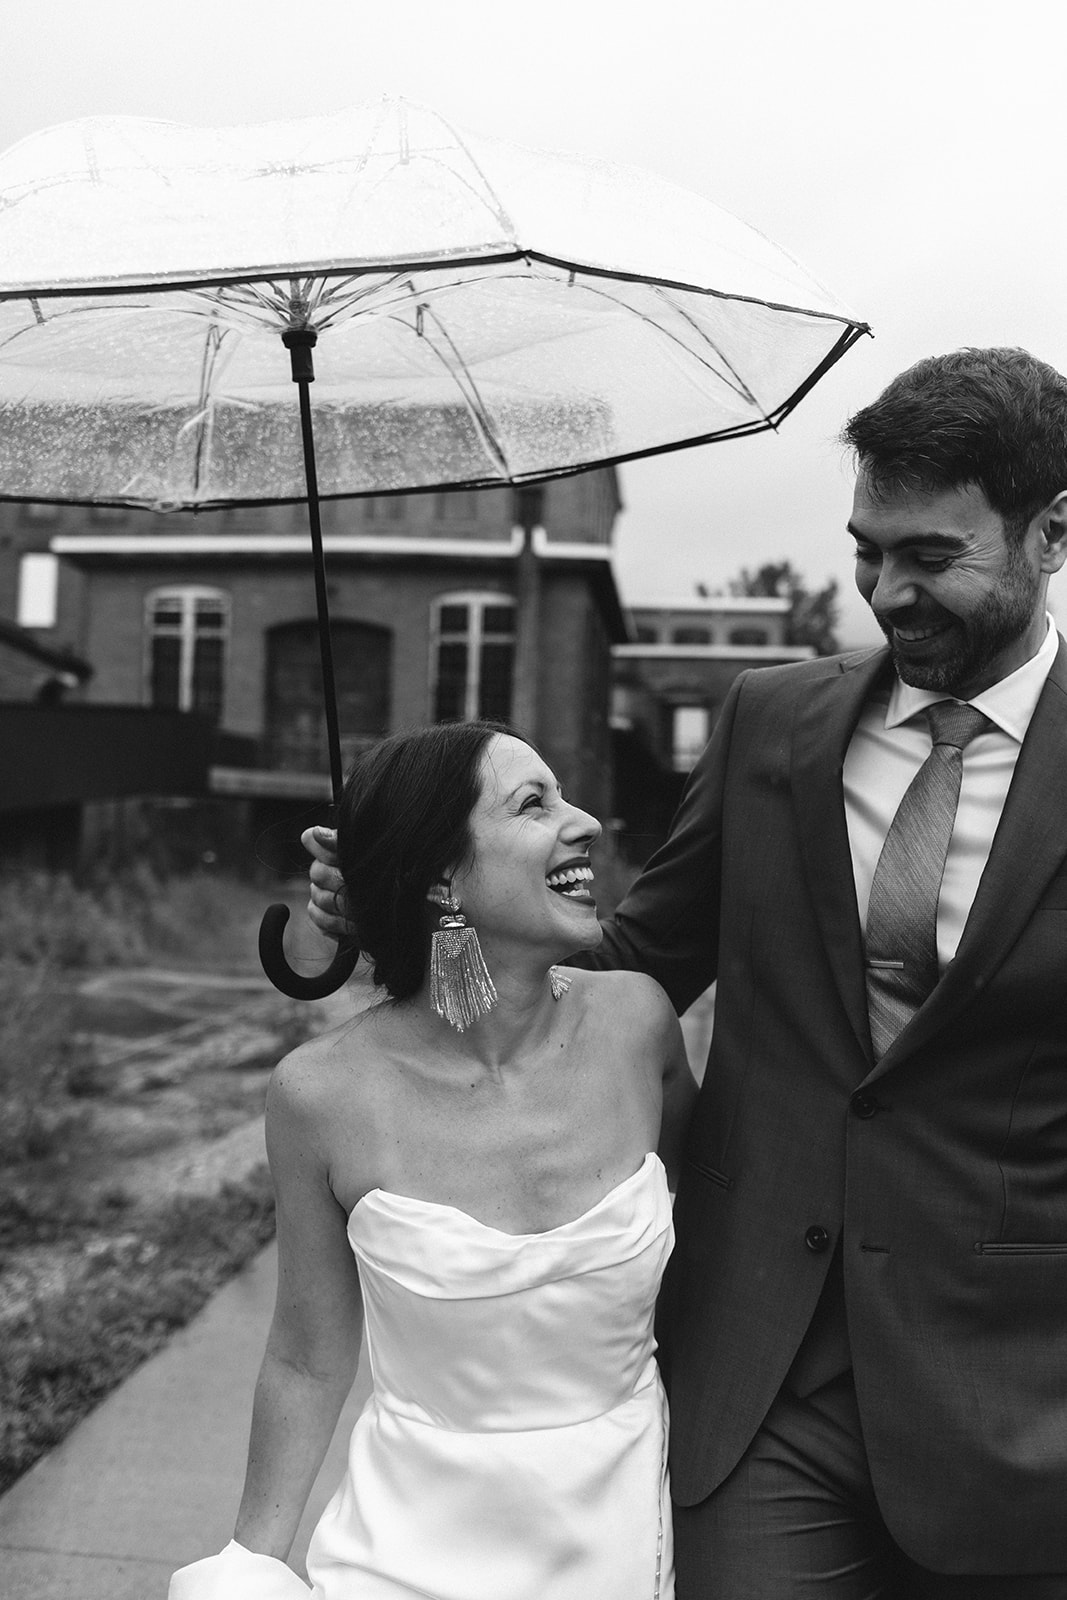 Bride and groom pose under an umbrella during their rainy wedding day at Greylock Works